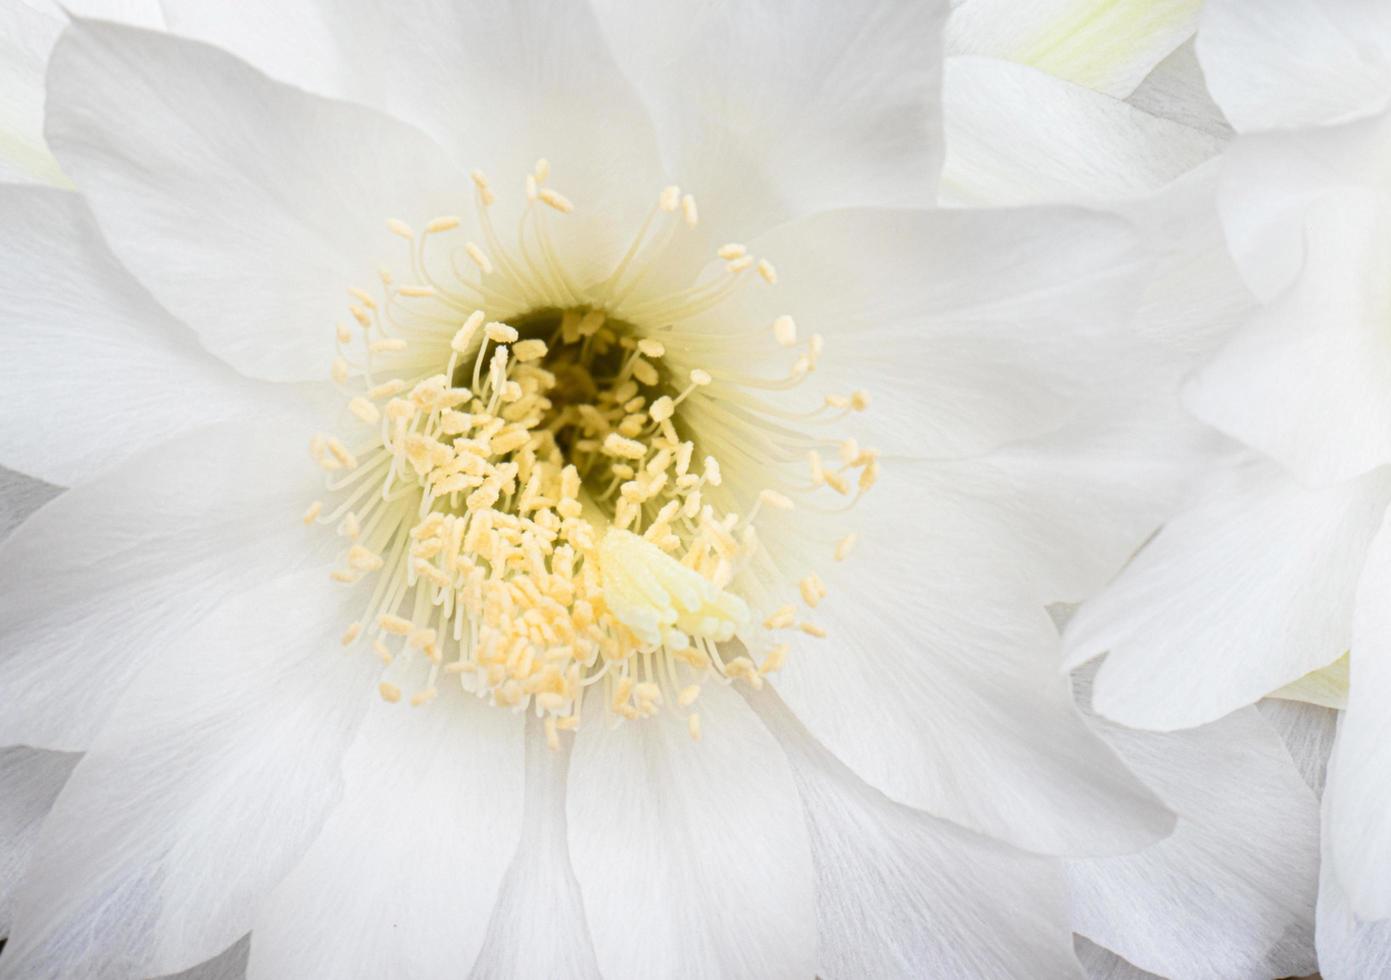 Pollen of White flowers from the cactus plant name Ichinov. Flowers blooming on cacti in small pots. photo